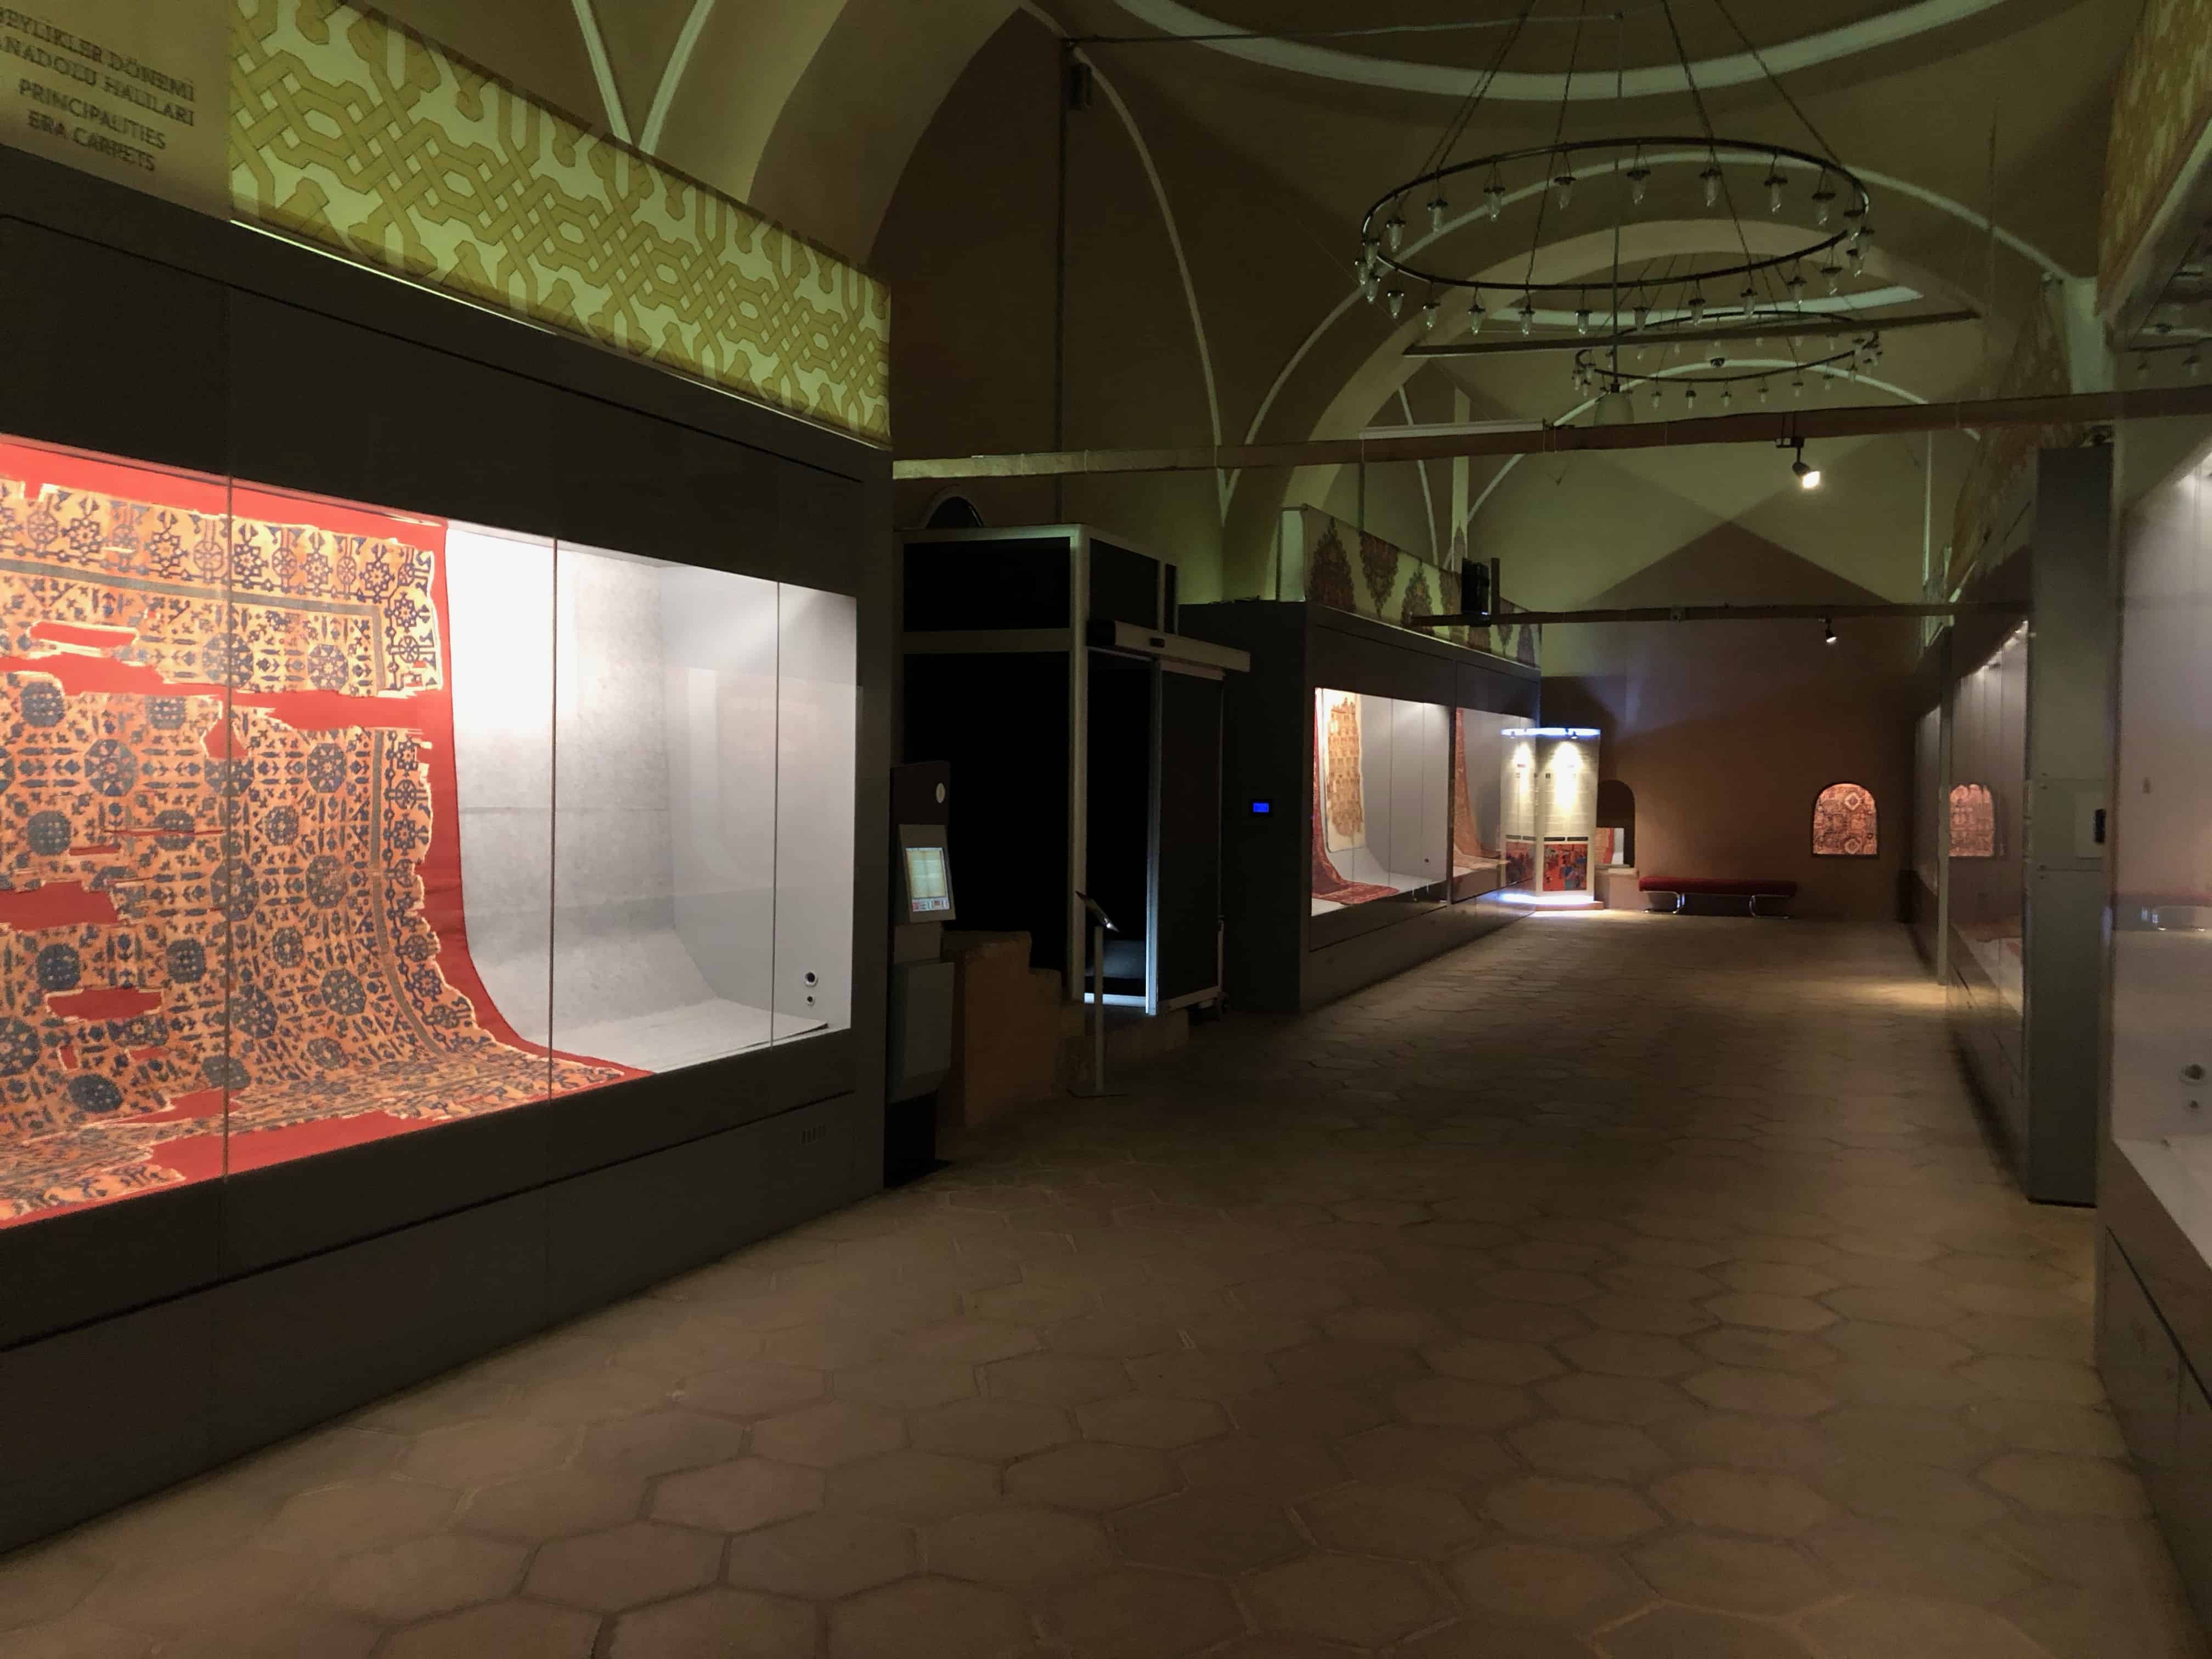 First gallery at the Carpet Museum in Istanbul, Turkey